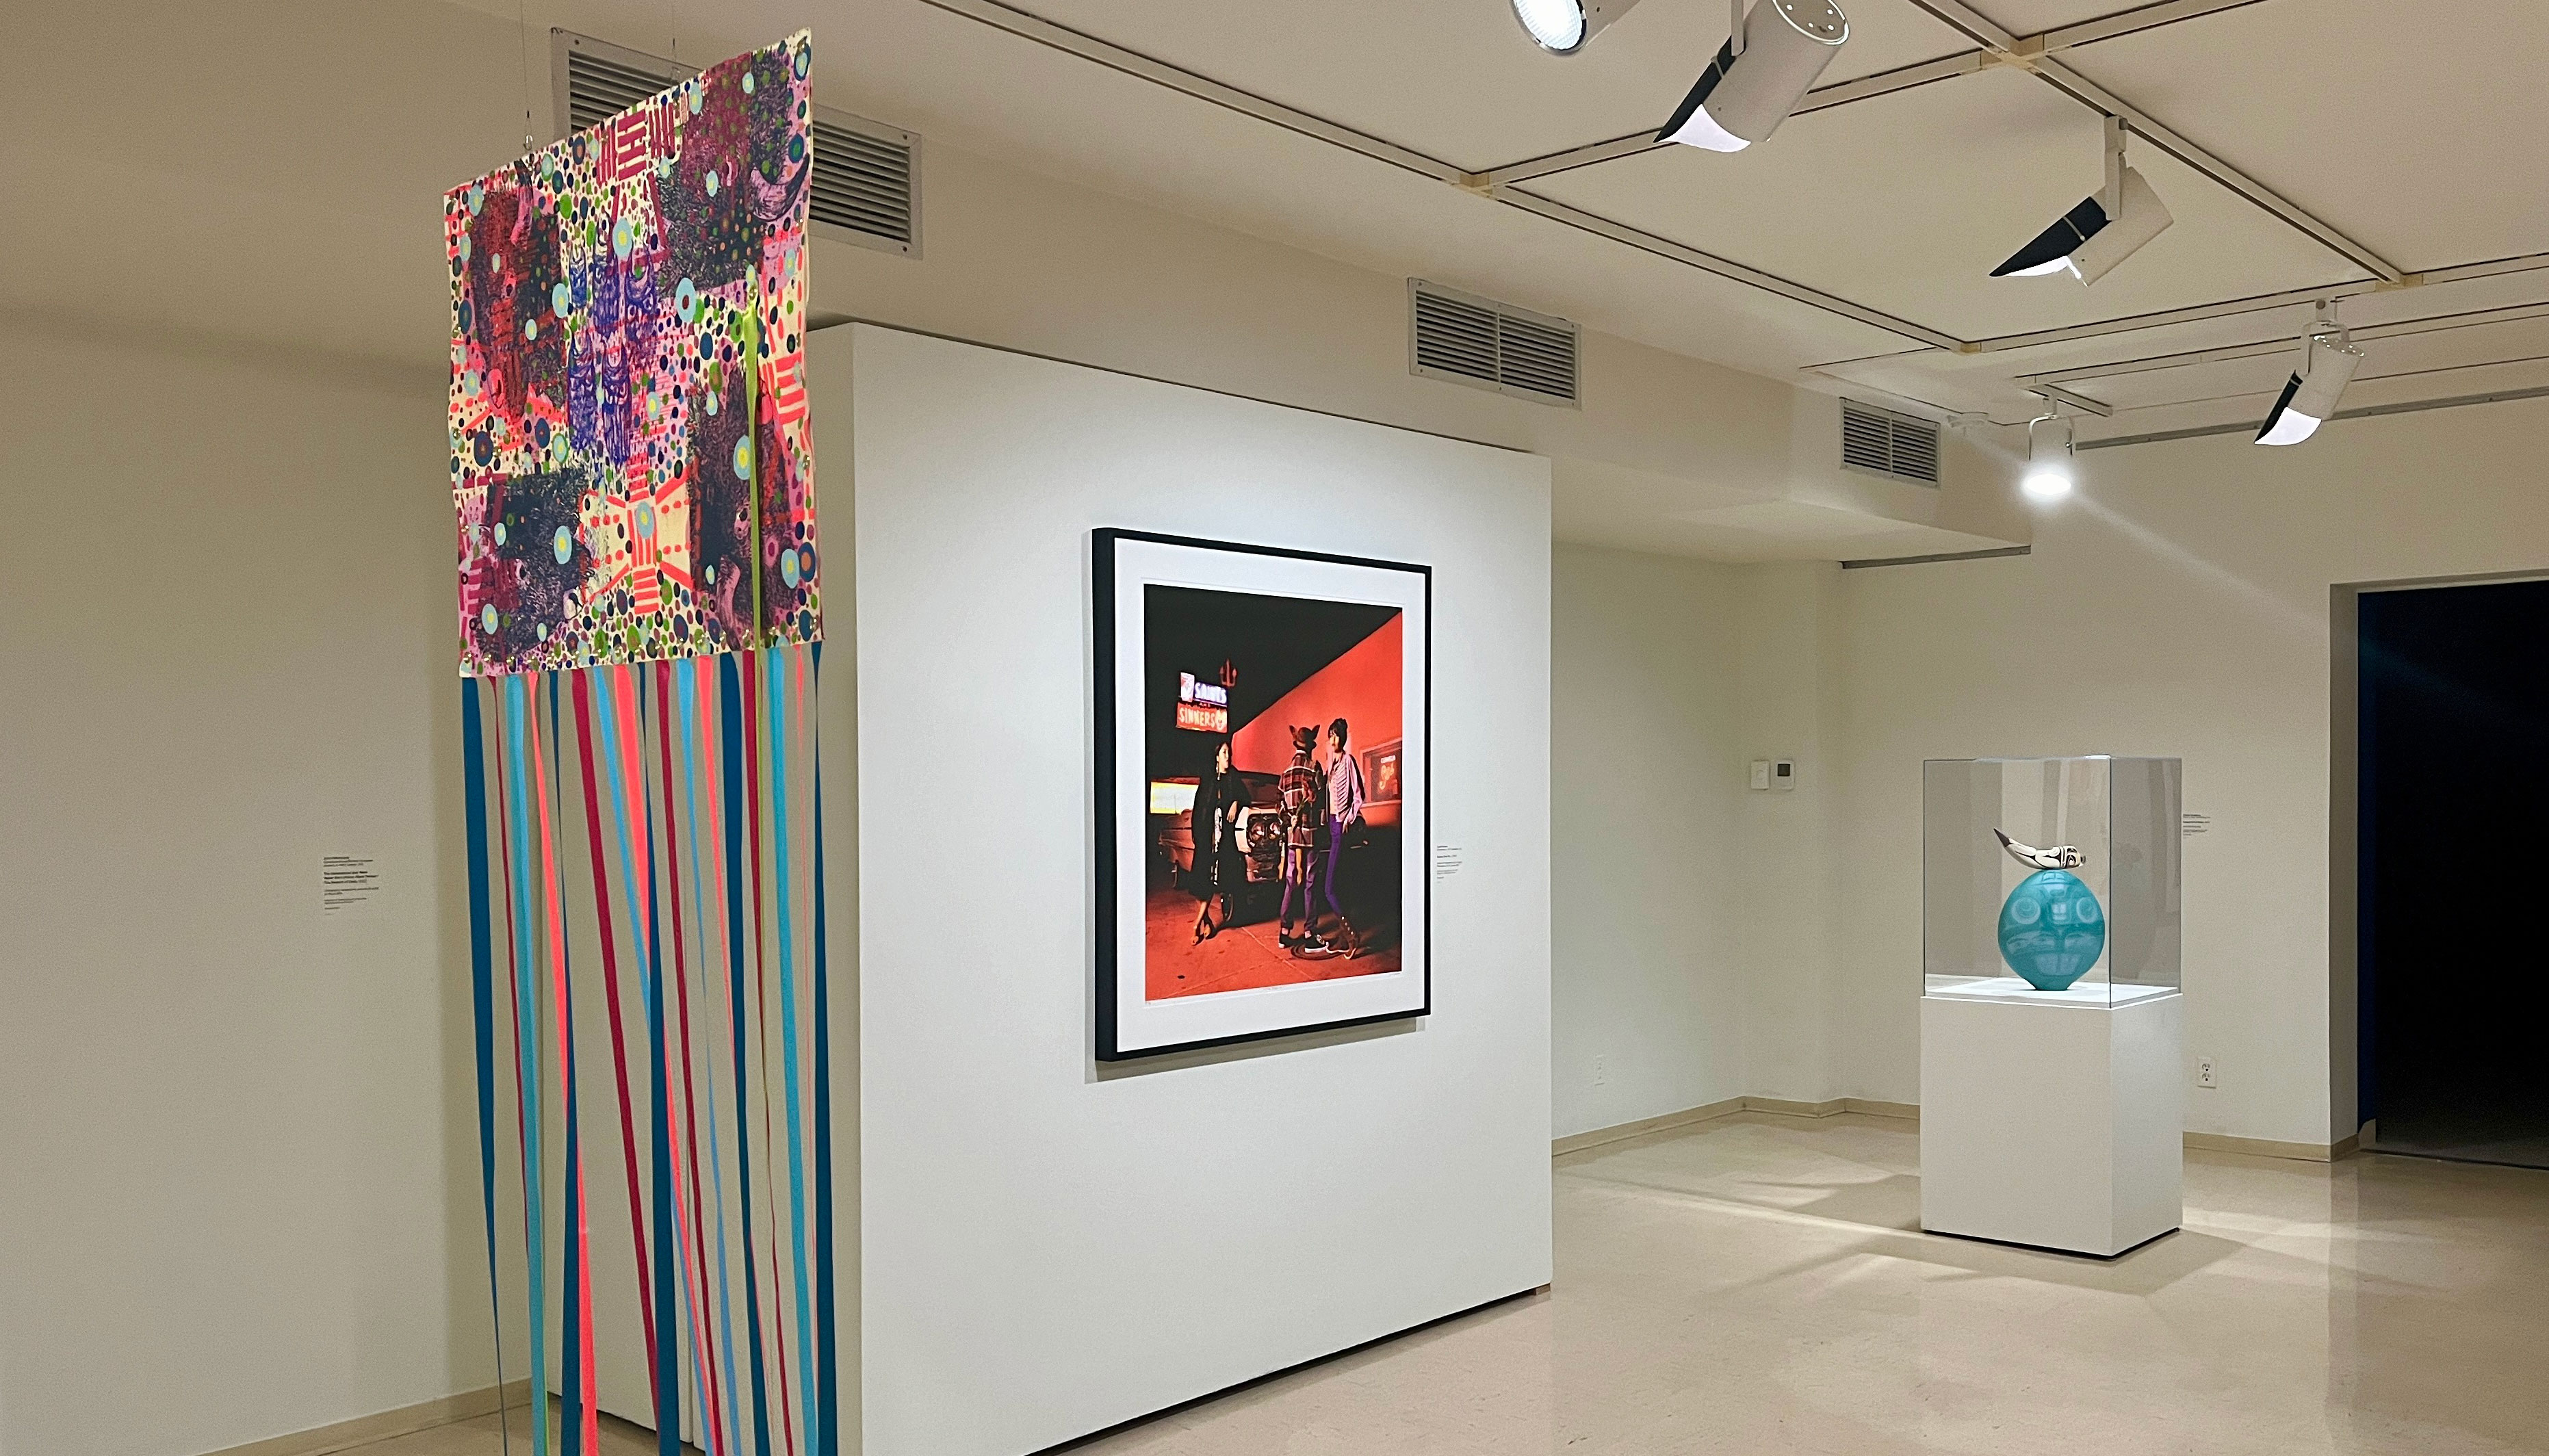 Image of a corner of the gallery featuring work by Harriet Bart.